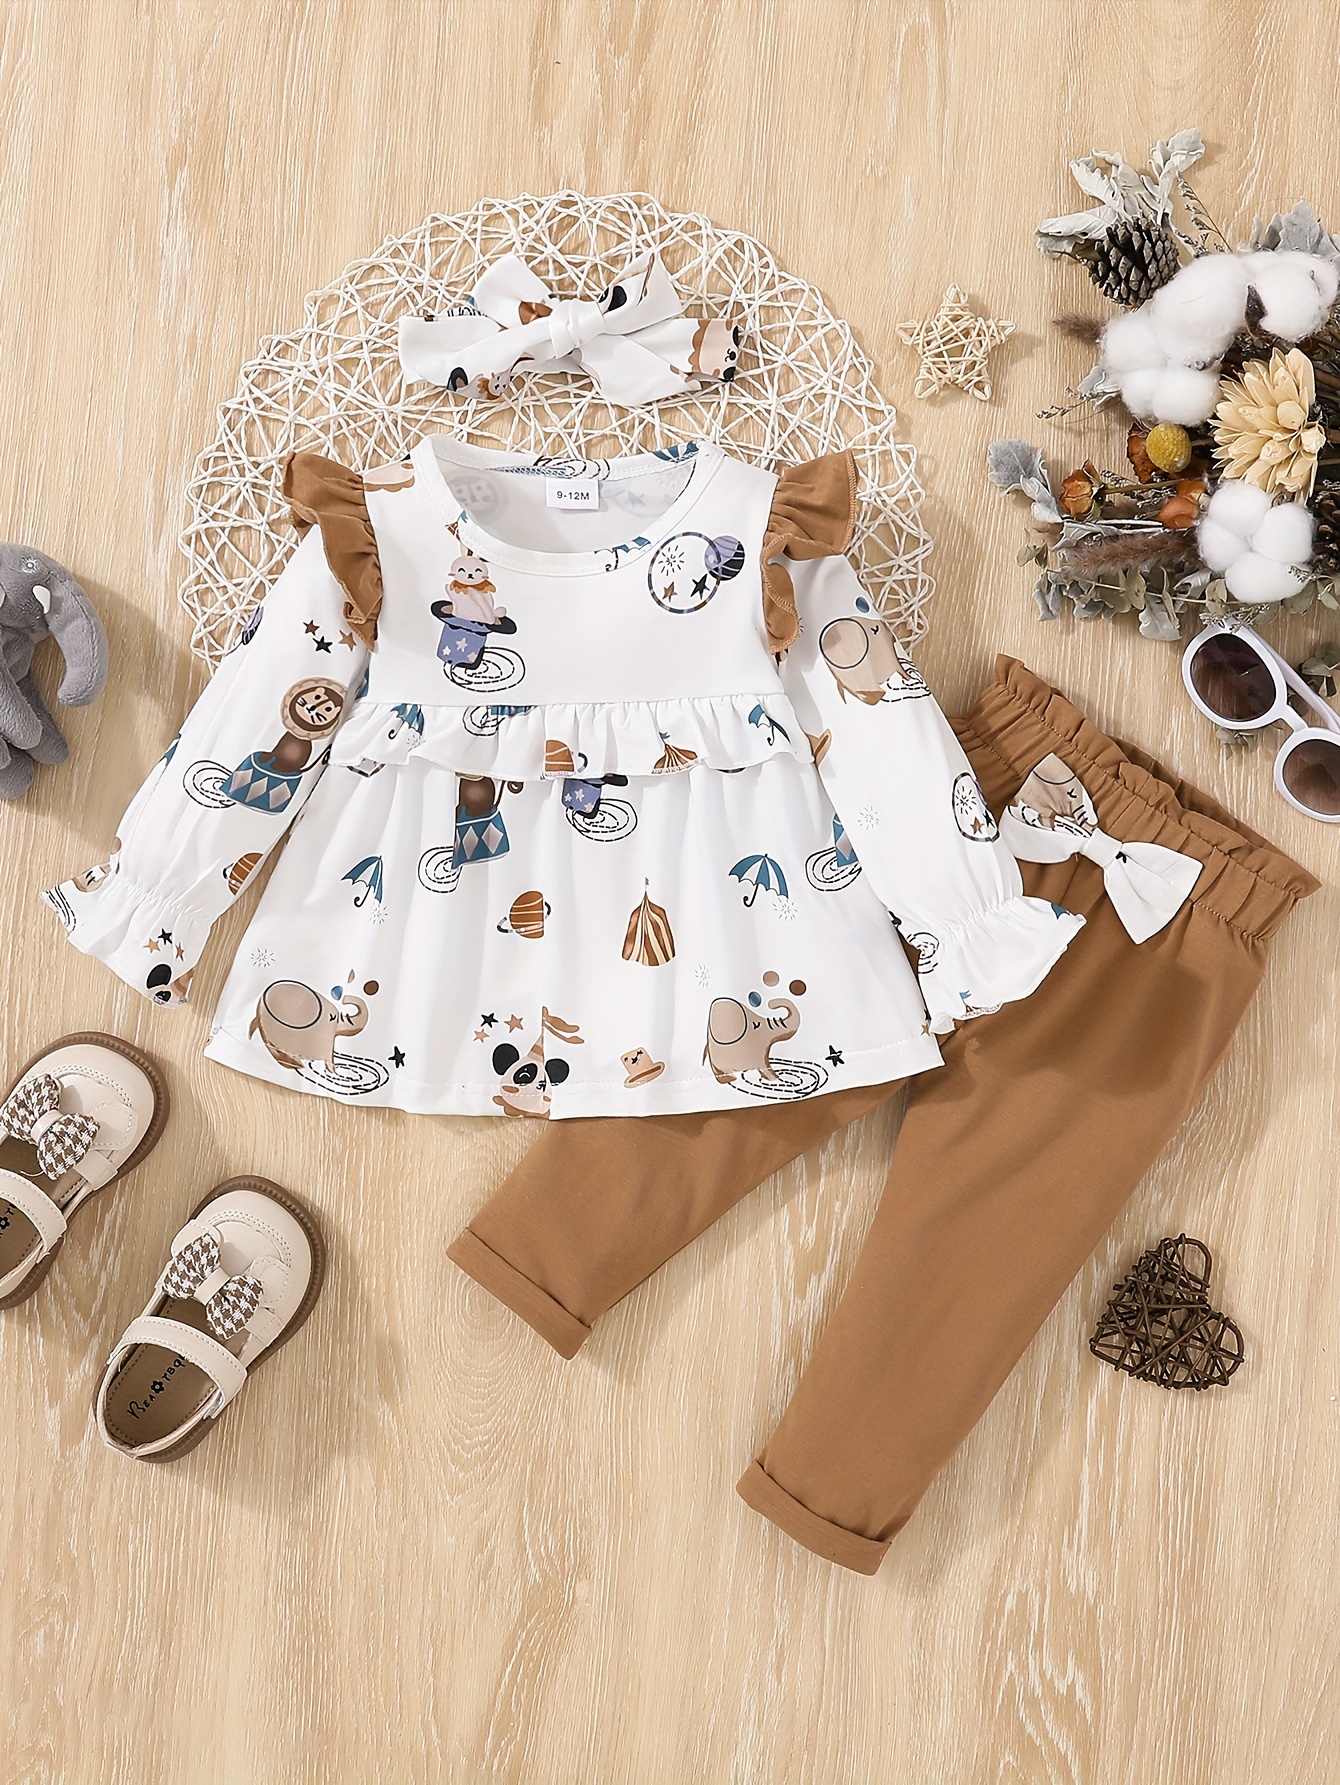 Baby Girl Clothes New Born Baby Clothes for Girl Baby Girls Autumn